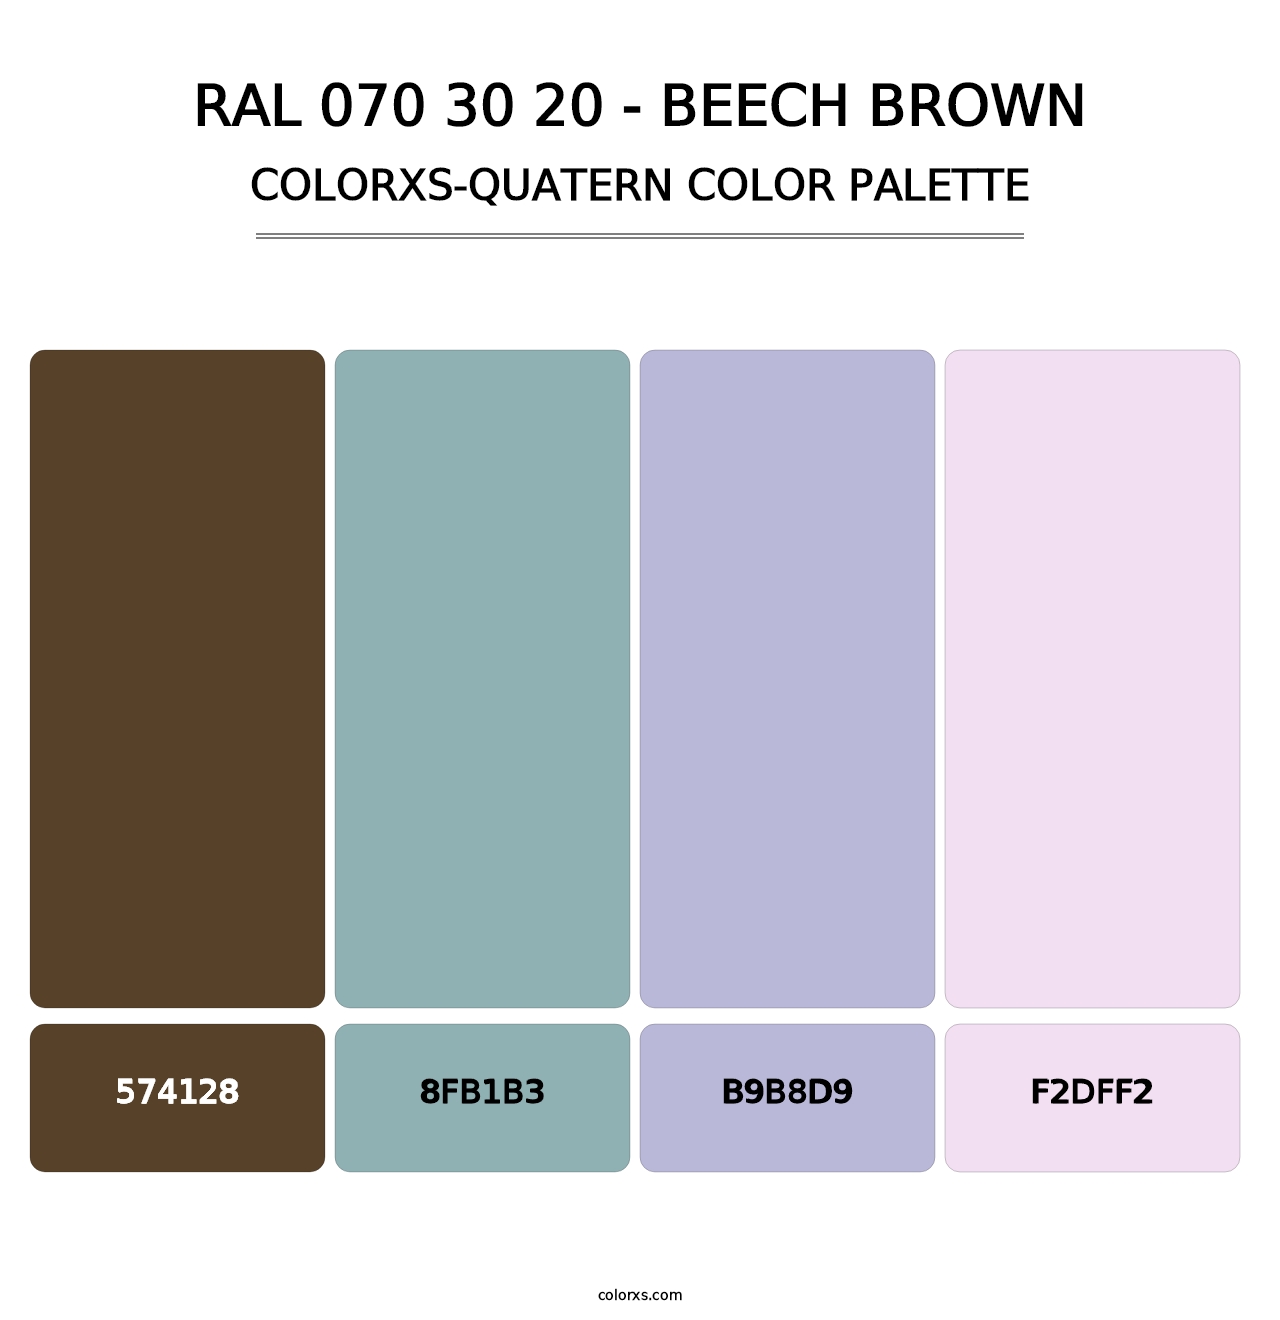 RAL 070 30 20 - Beech Brown - Colorxs Quatern Palette